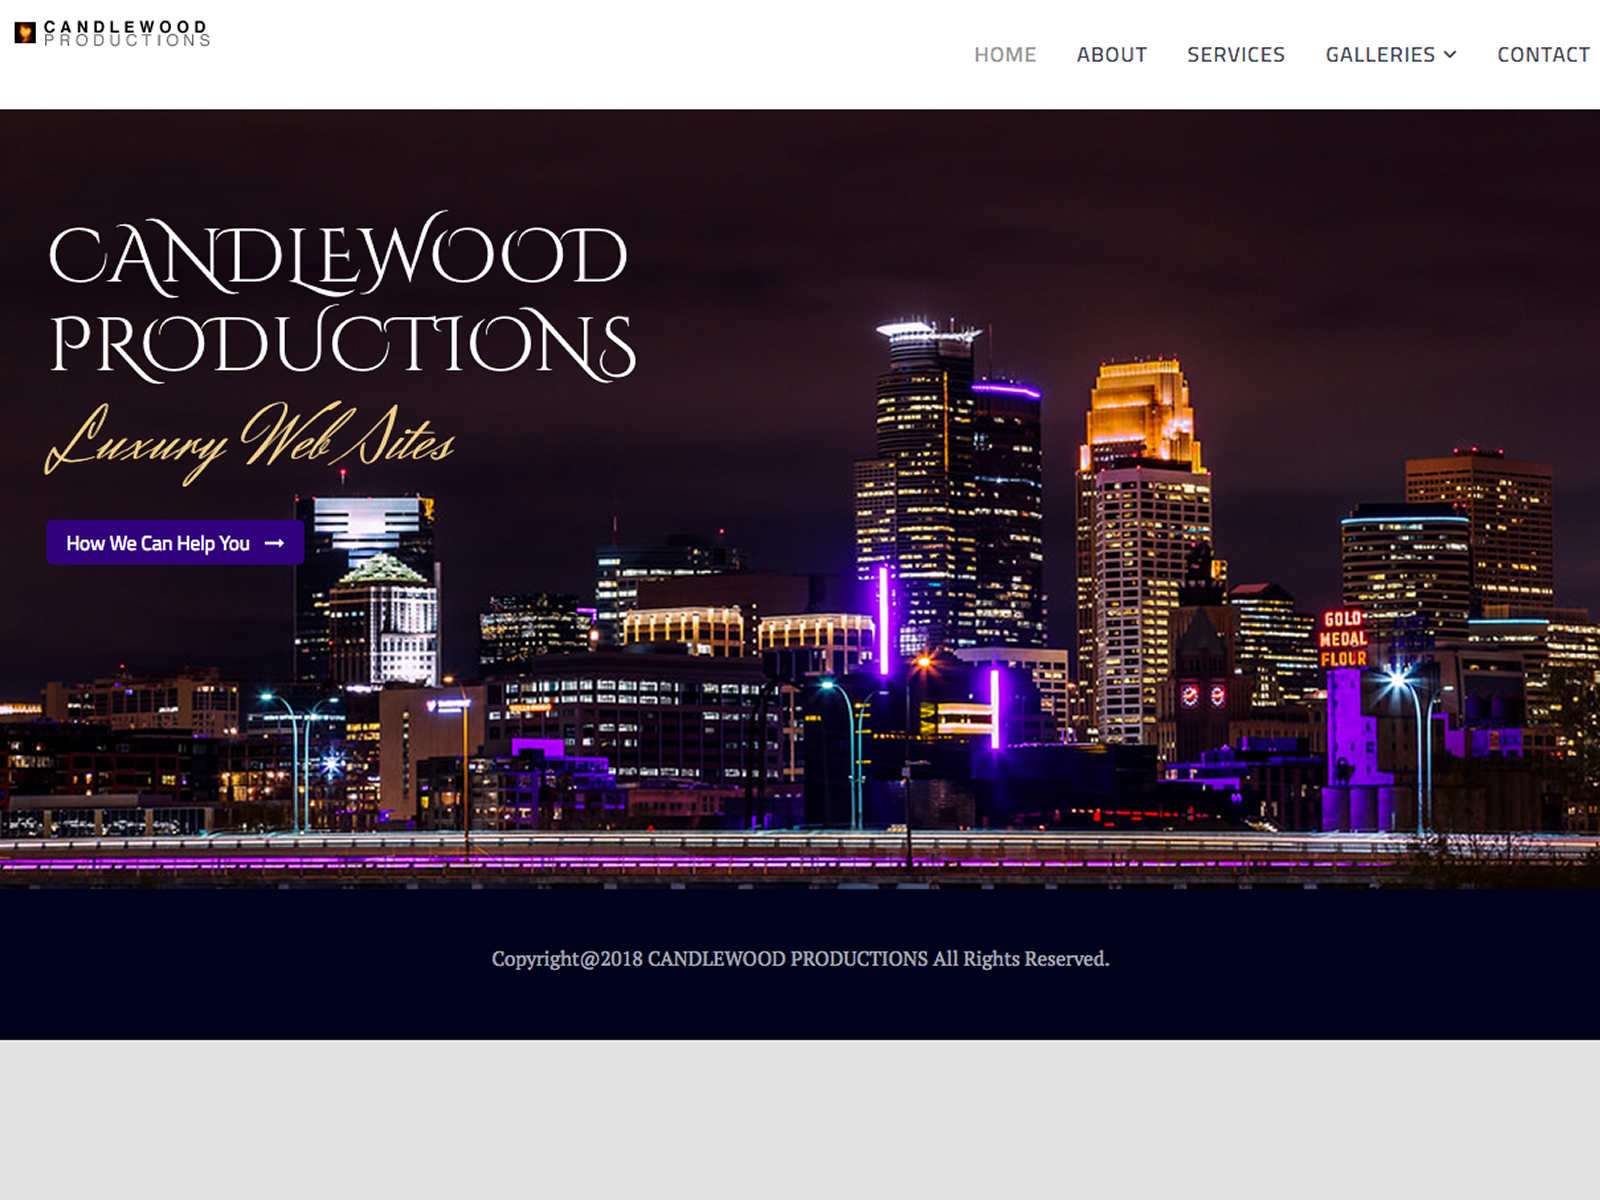 Candlewood Productions